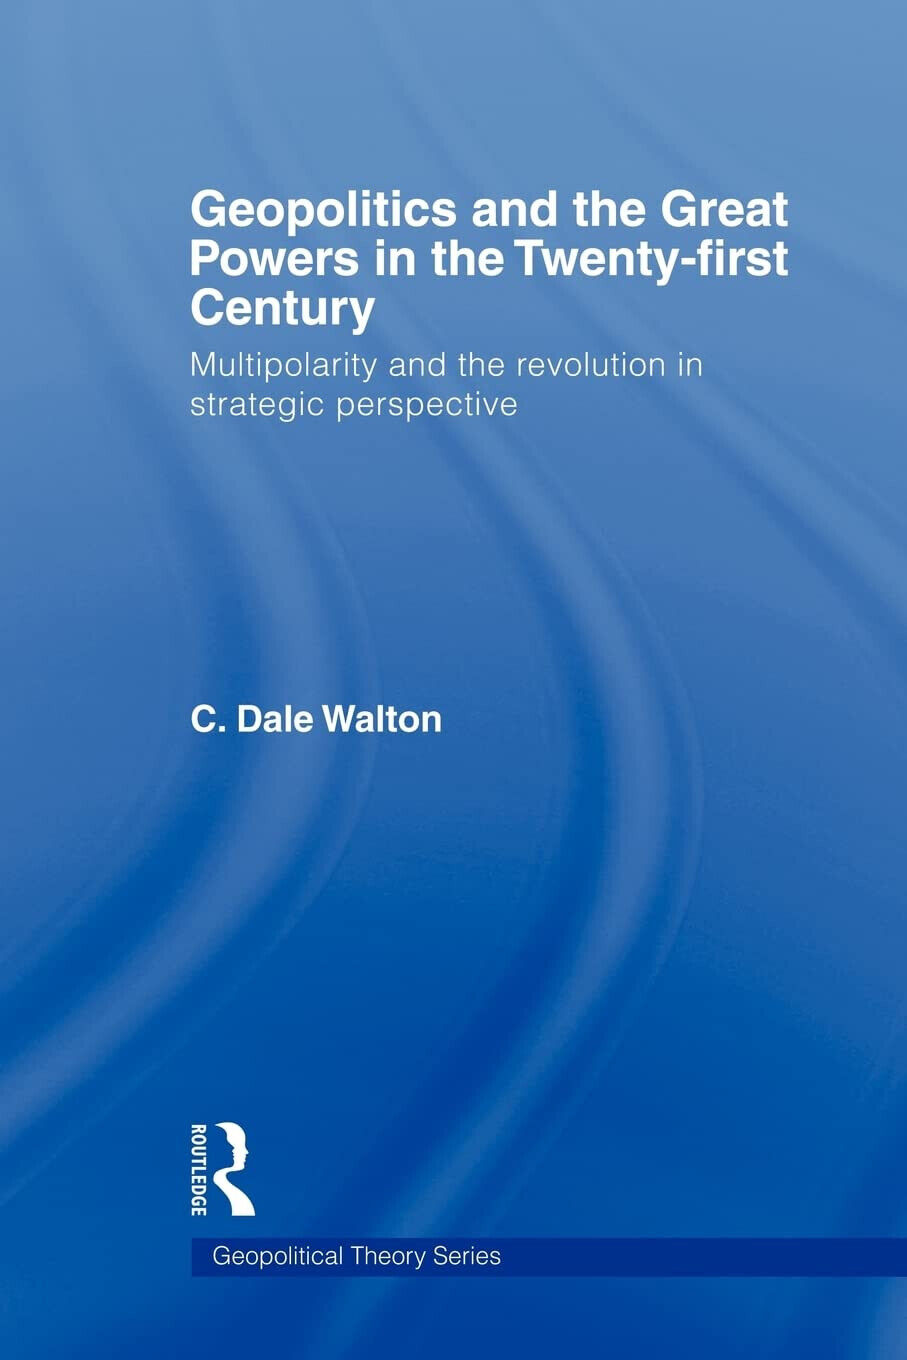 Geopolitics and the Great Powers in the 21st Century - C. Dale - 2009